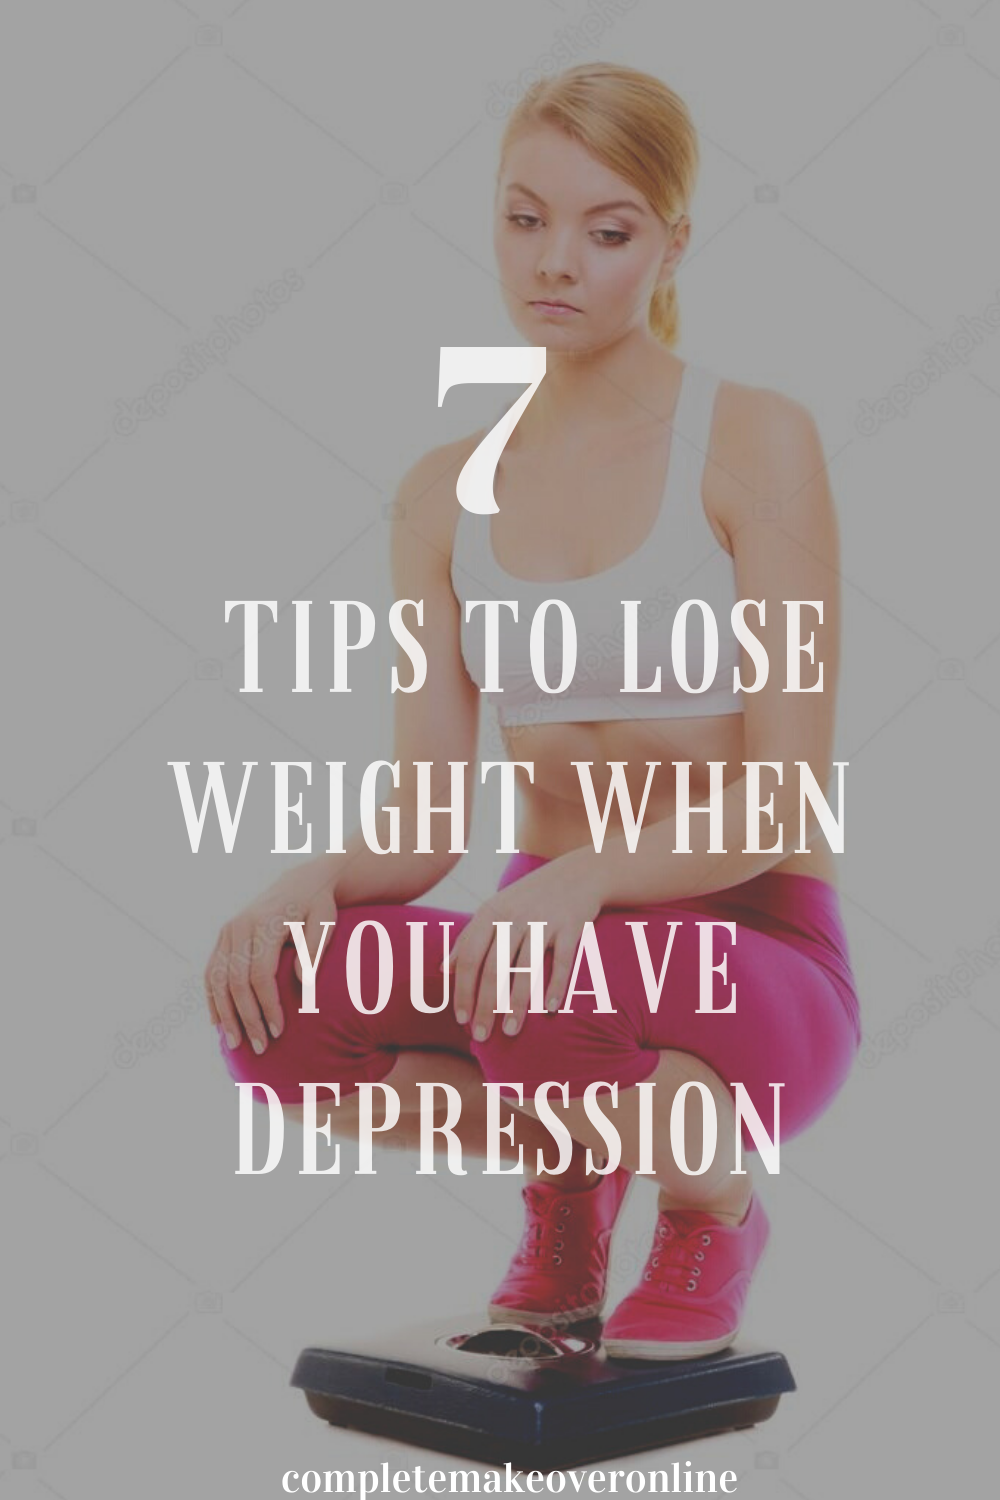 How to Get Motivated to Lose Weight When Youâre Depressed â Complete ...